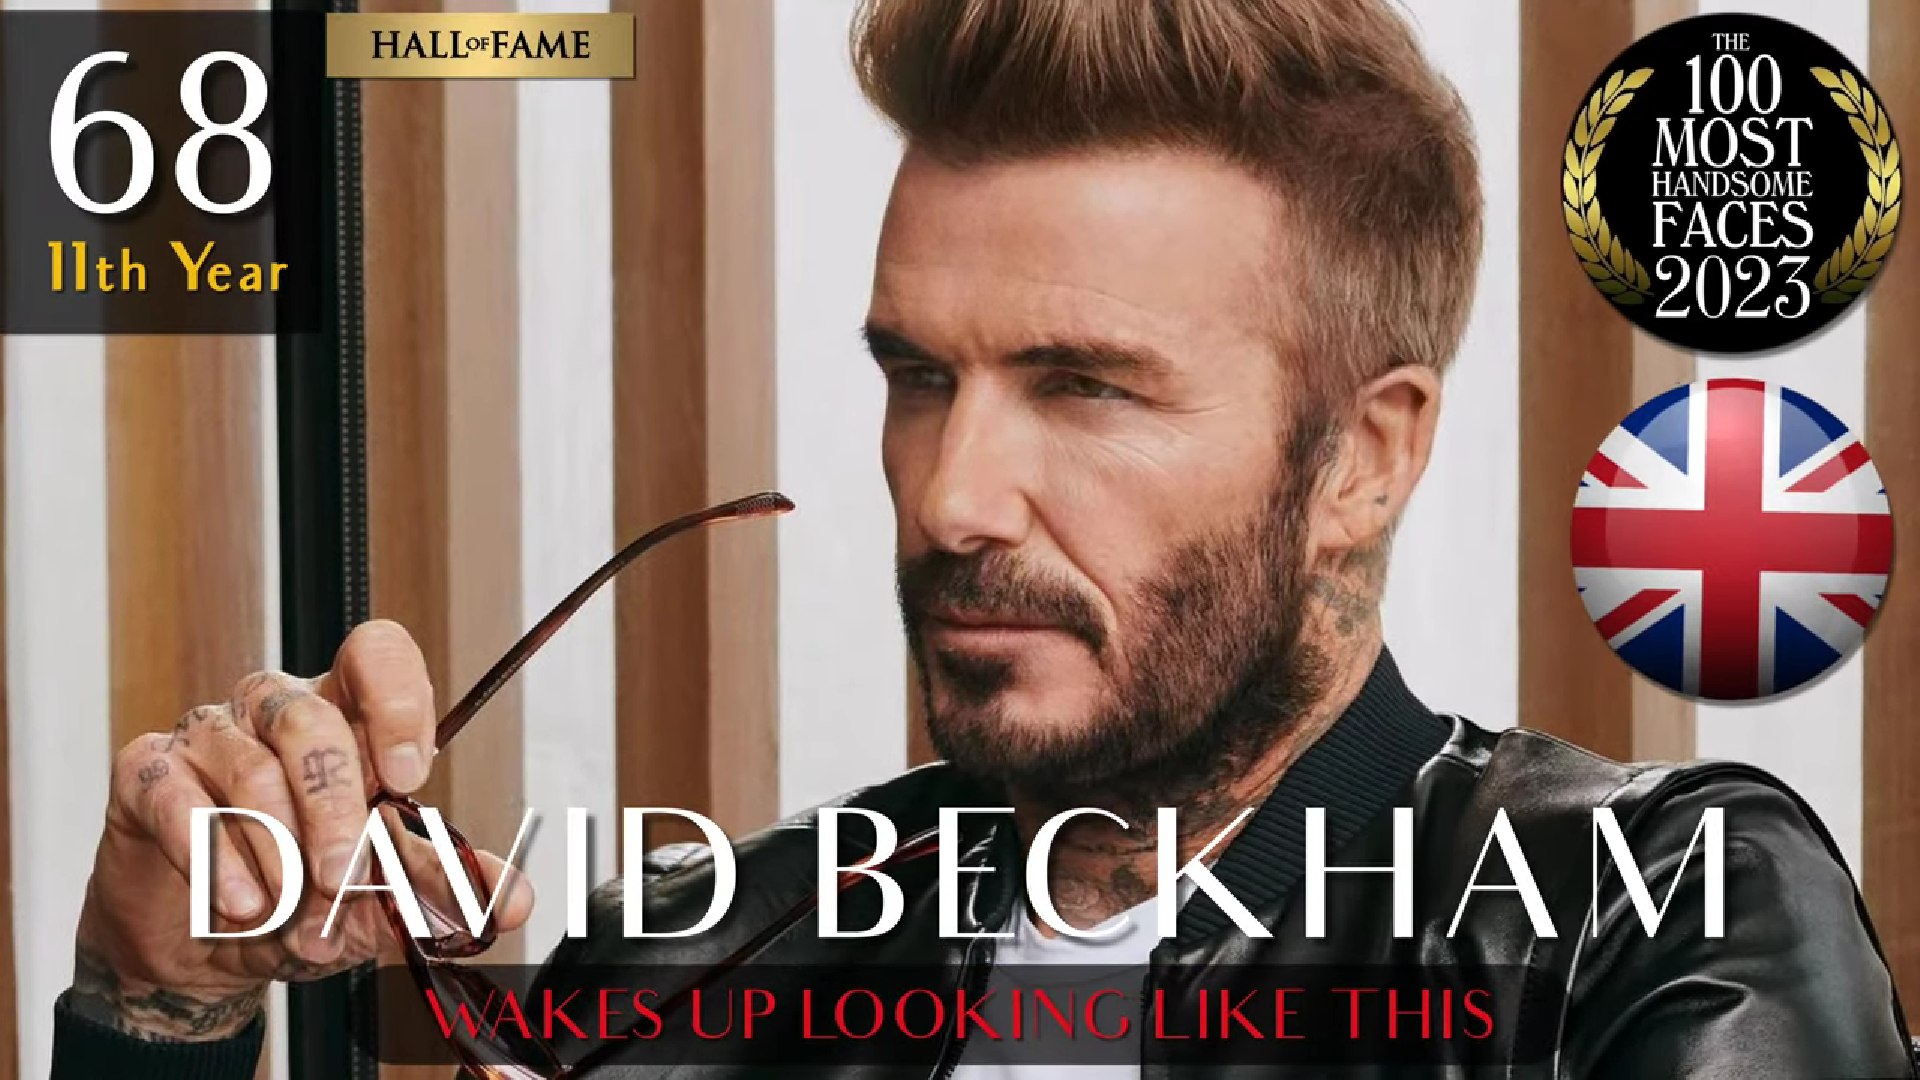 David beckham ranked 62 in the '100 most handsome faces list'